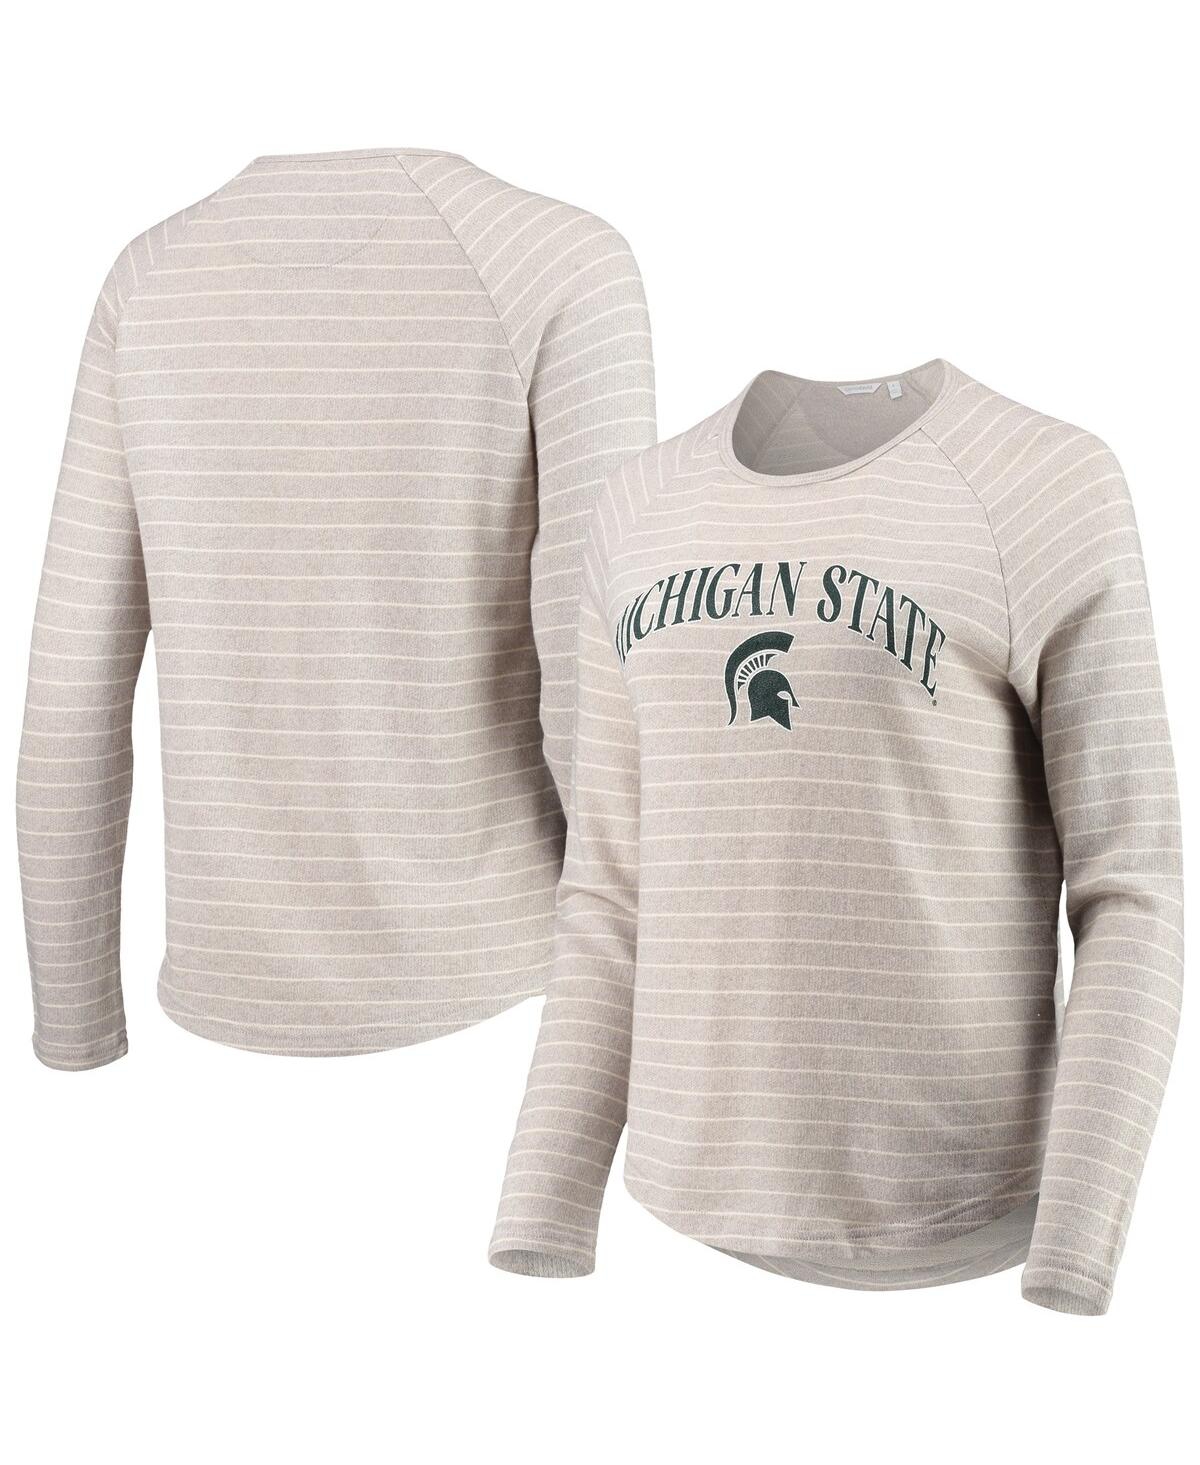 Women's Heathered Gray Michigan State Spartans Seaside Striped French Terry Raglan Pullover Sweatshirt - Heathered Gray